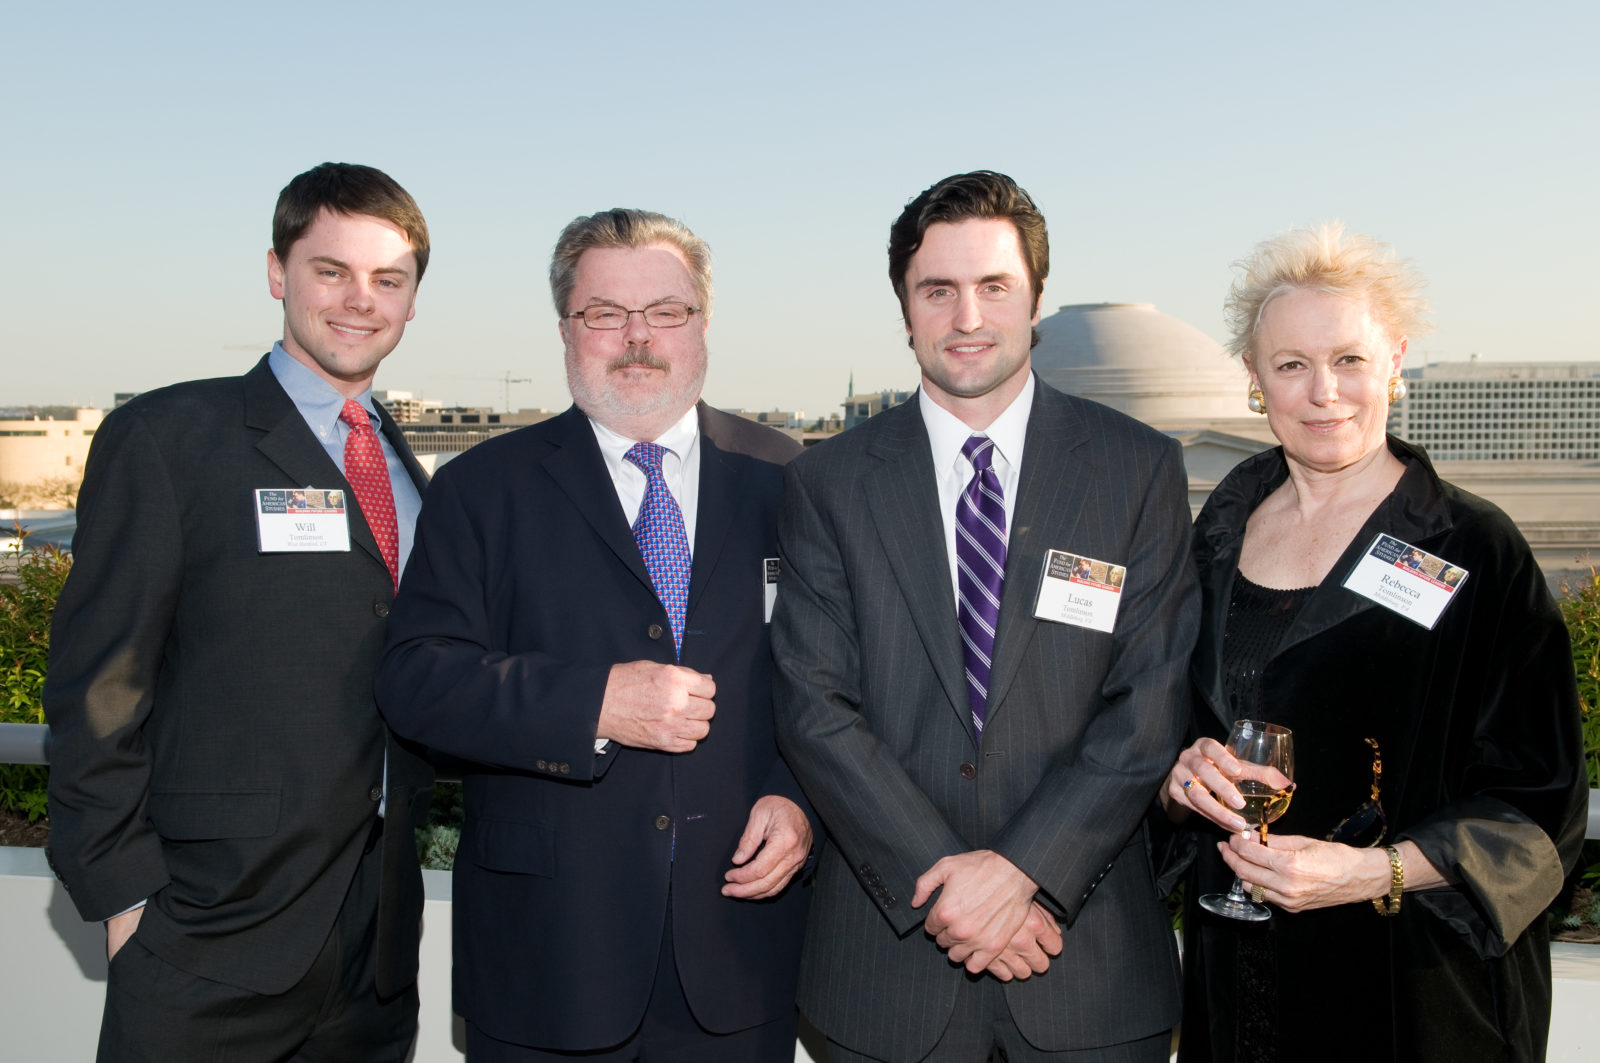 Tomlinson is pictured here with his family at the 2009 TFAS Annual Conference at the Newseum in Washington, D.C. Pictured (l.-r): Ken’s son and IPJ alumnus Will, Ken, son Lucas and wife Rebecca.